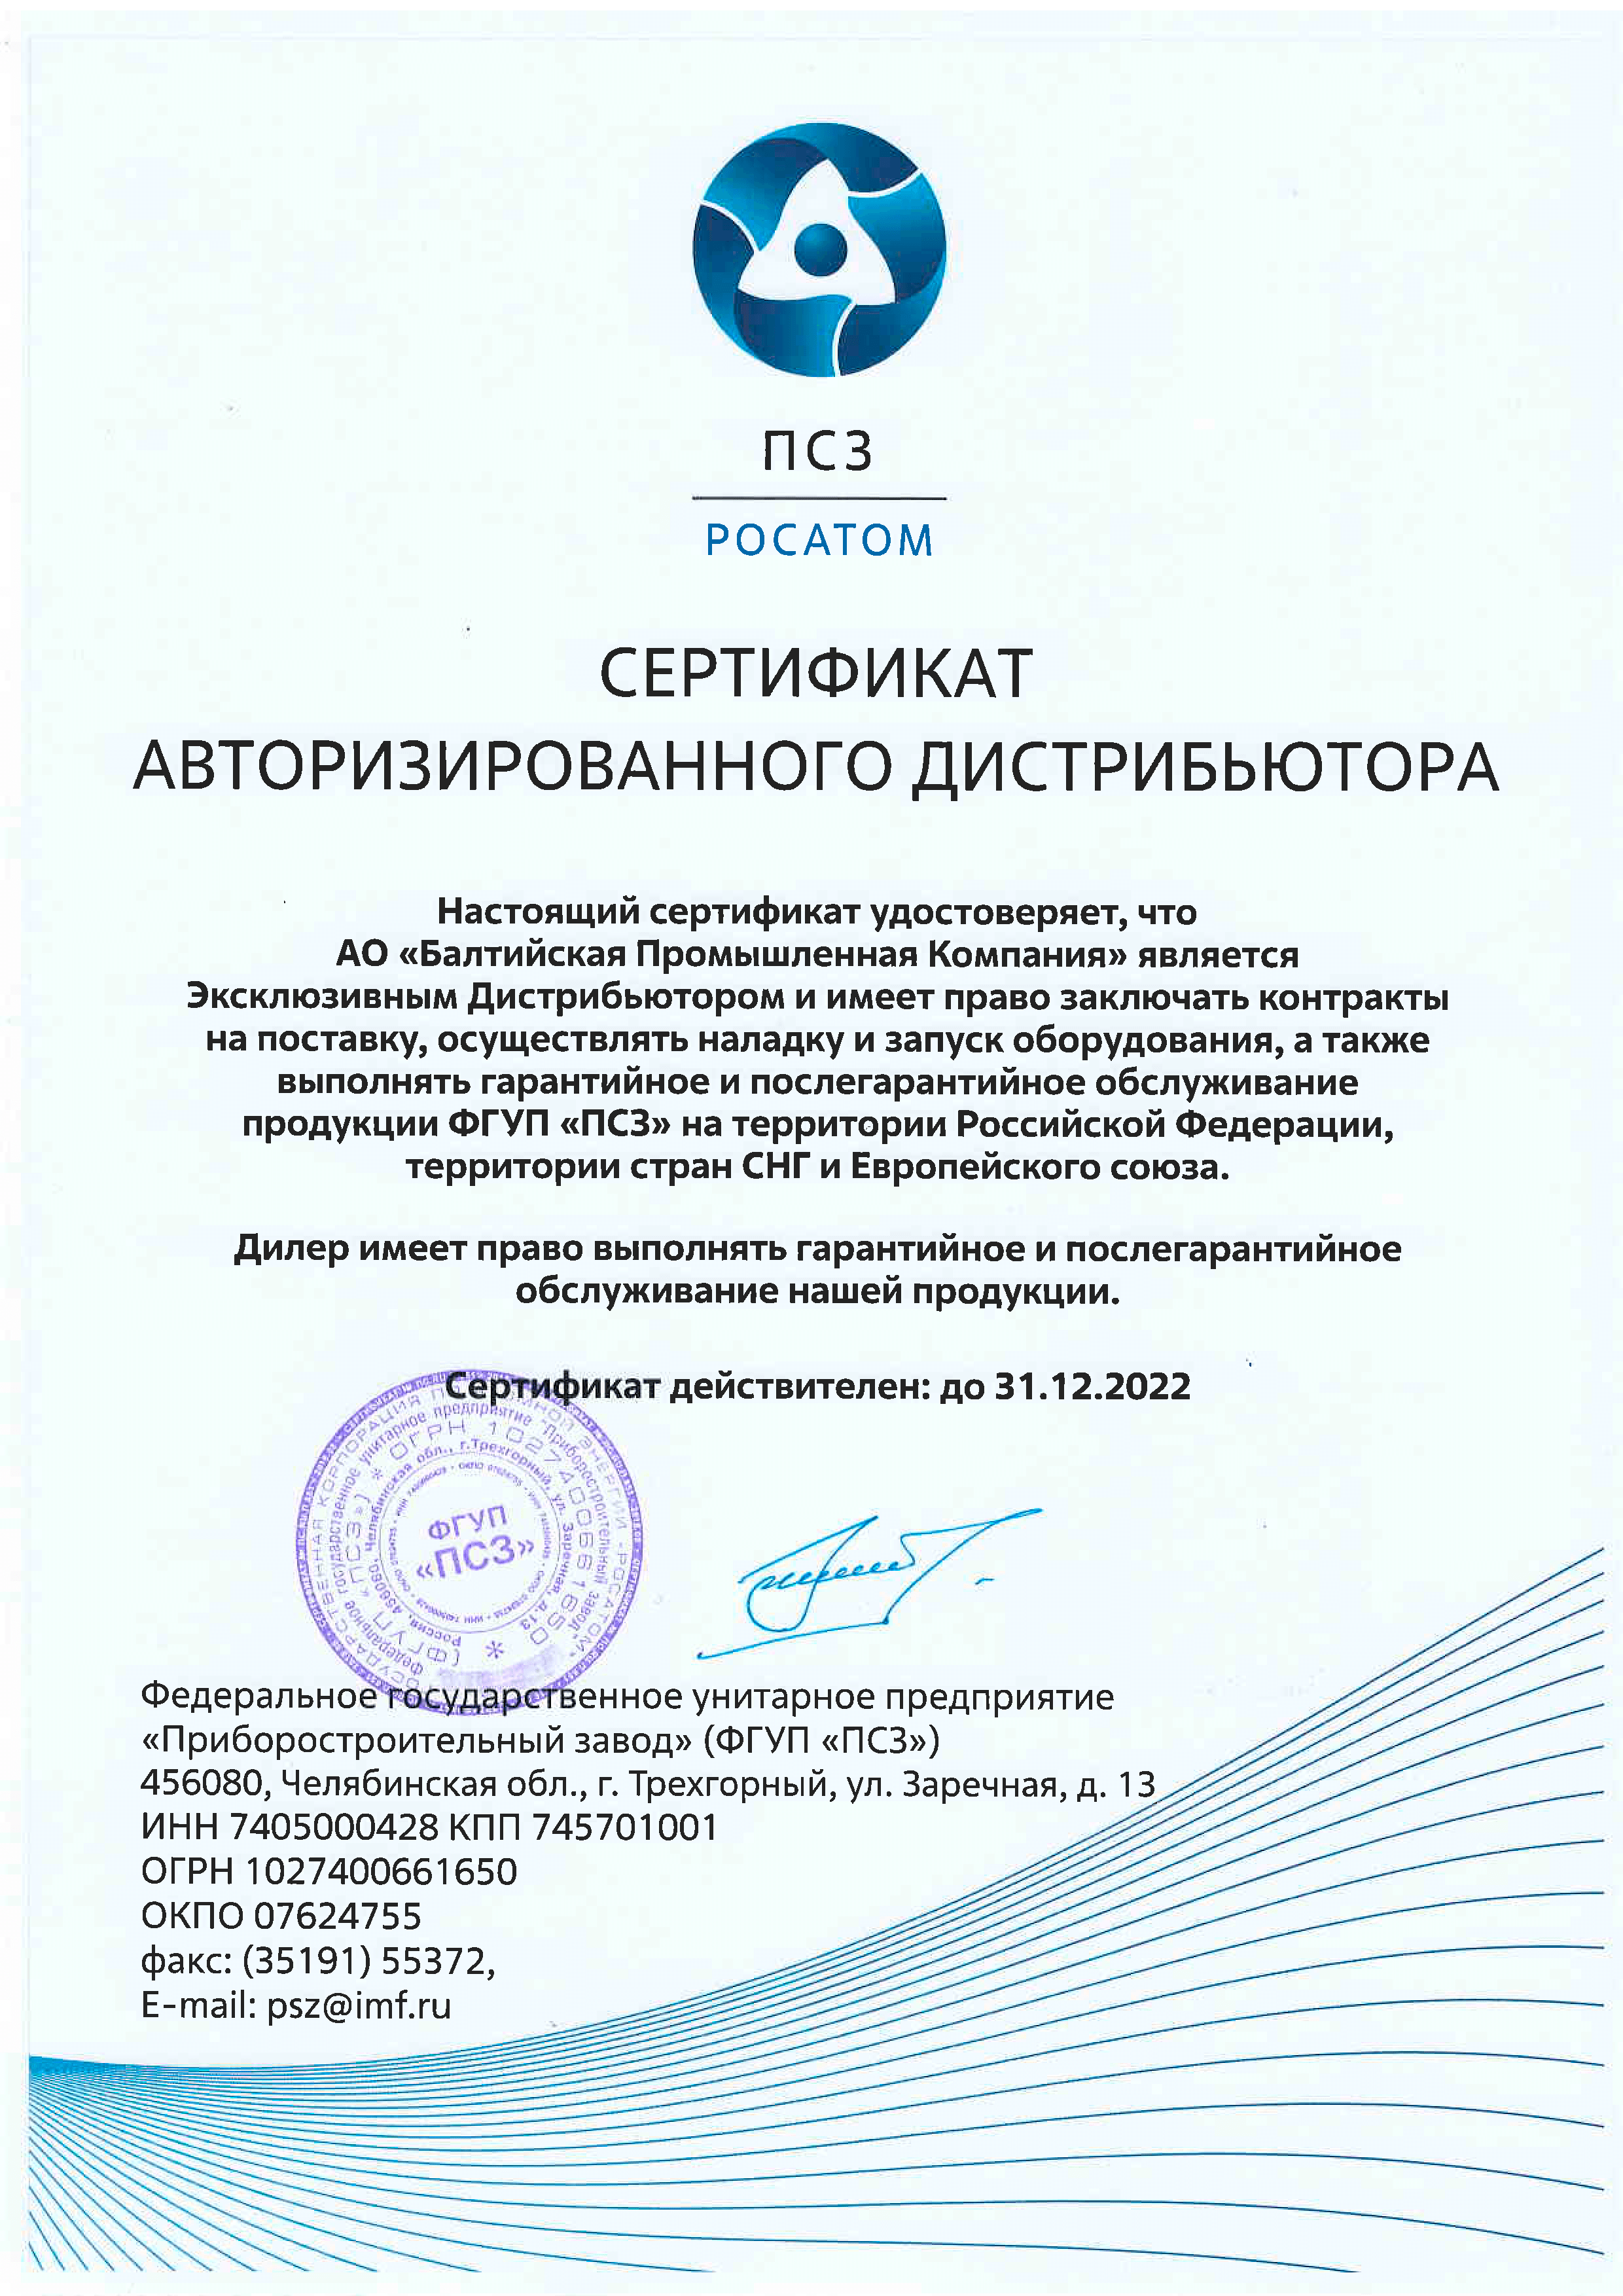 Certificate of authorized distributor "PSZ"